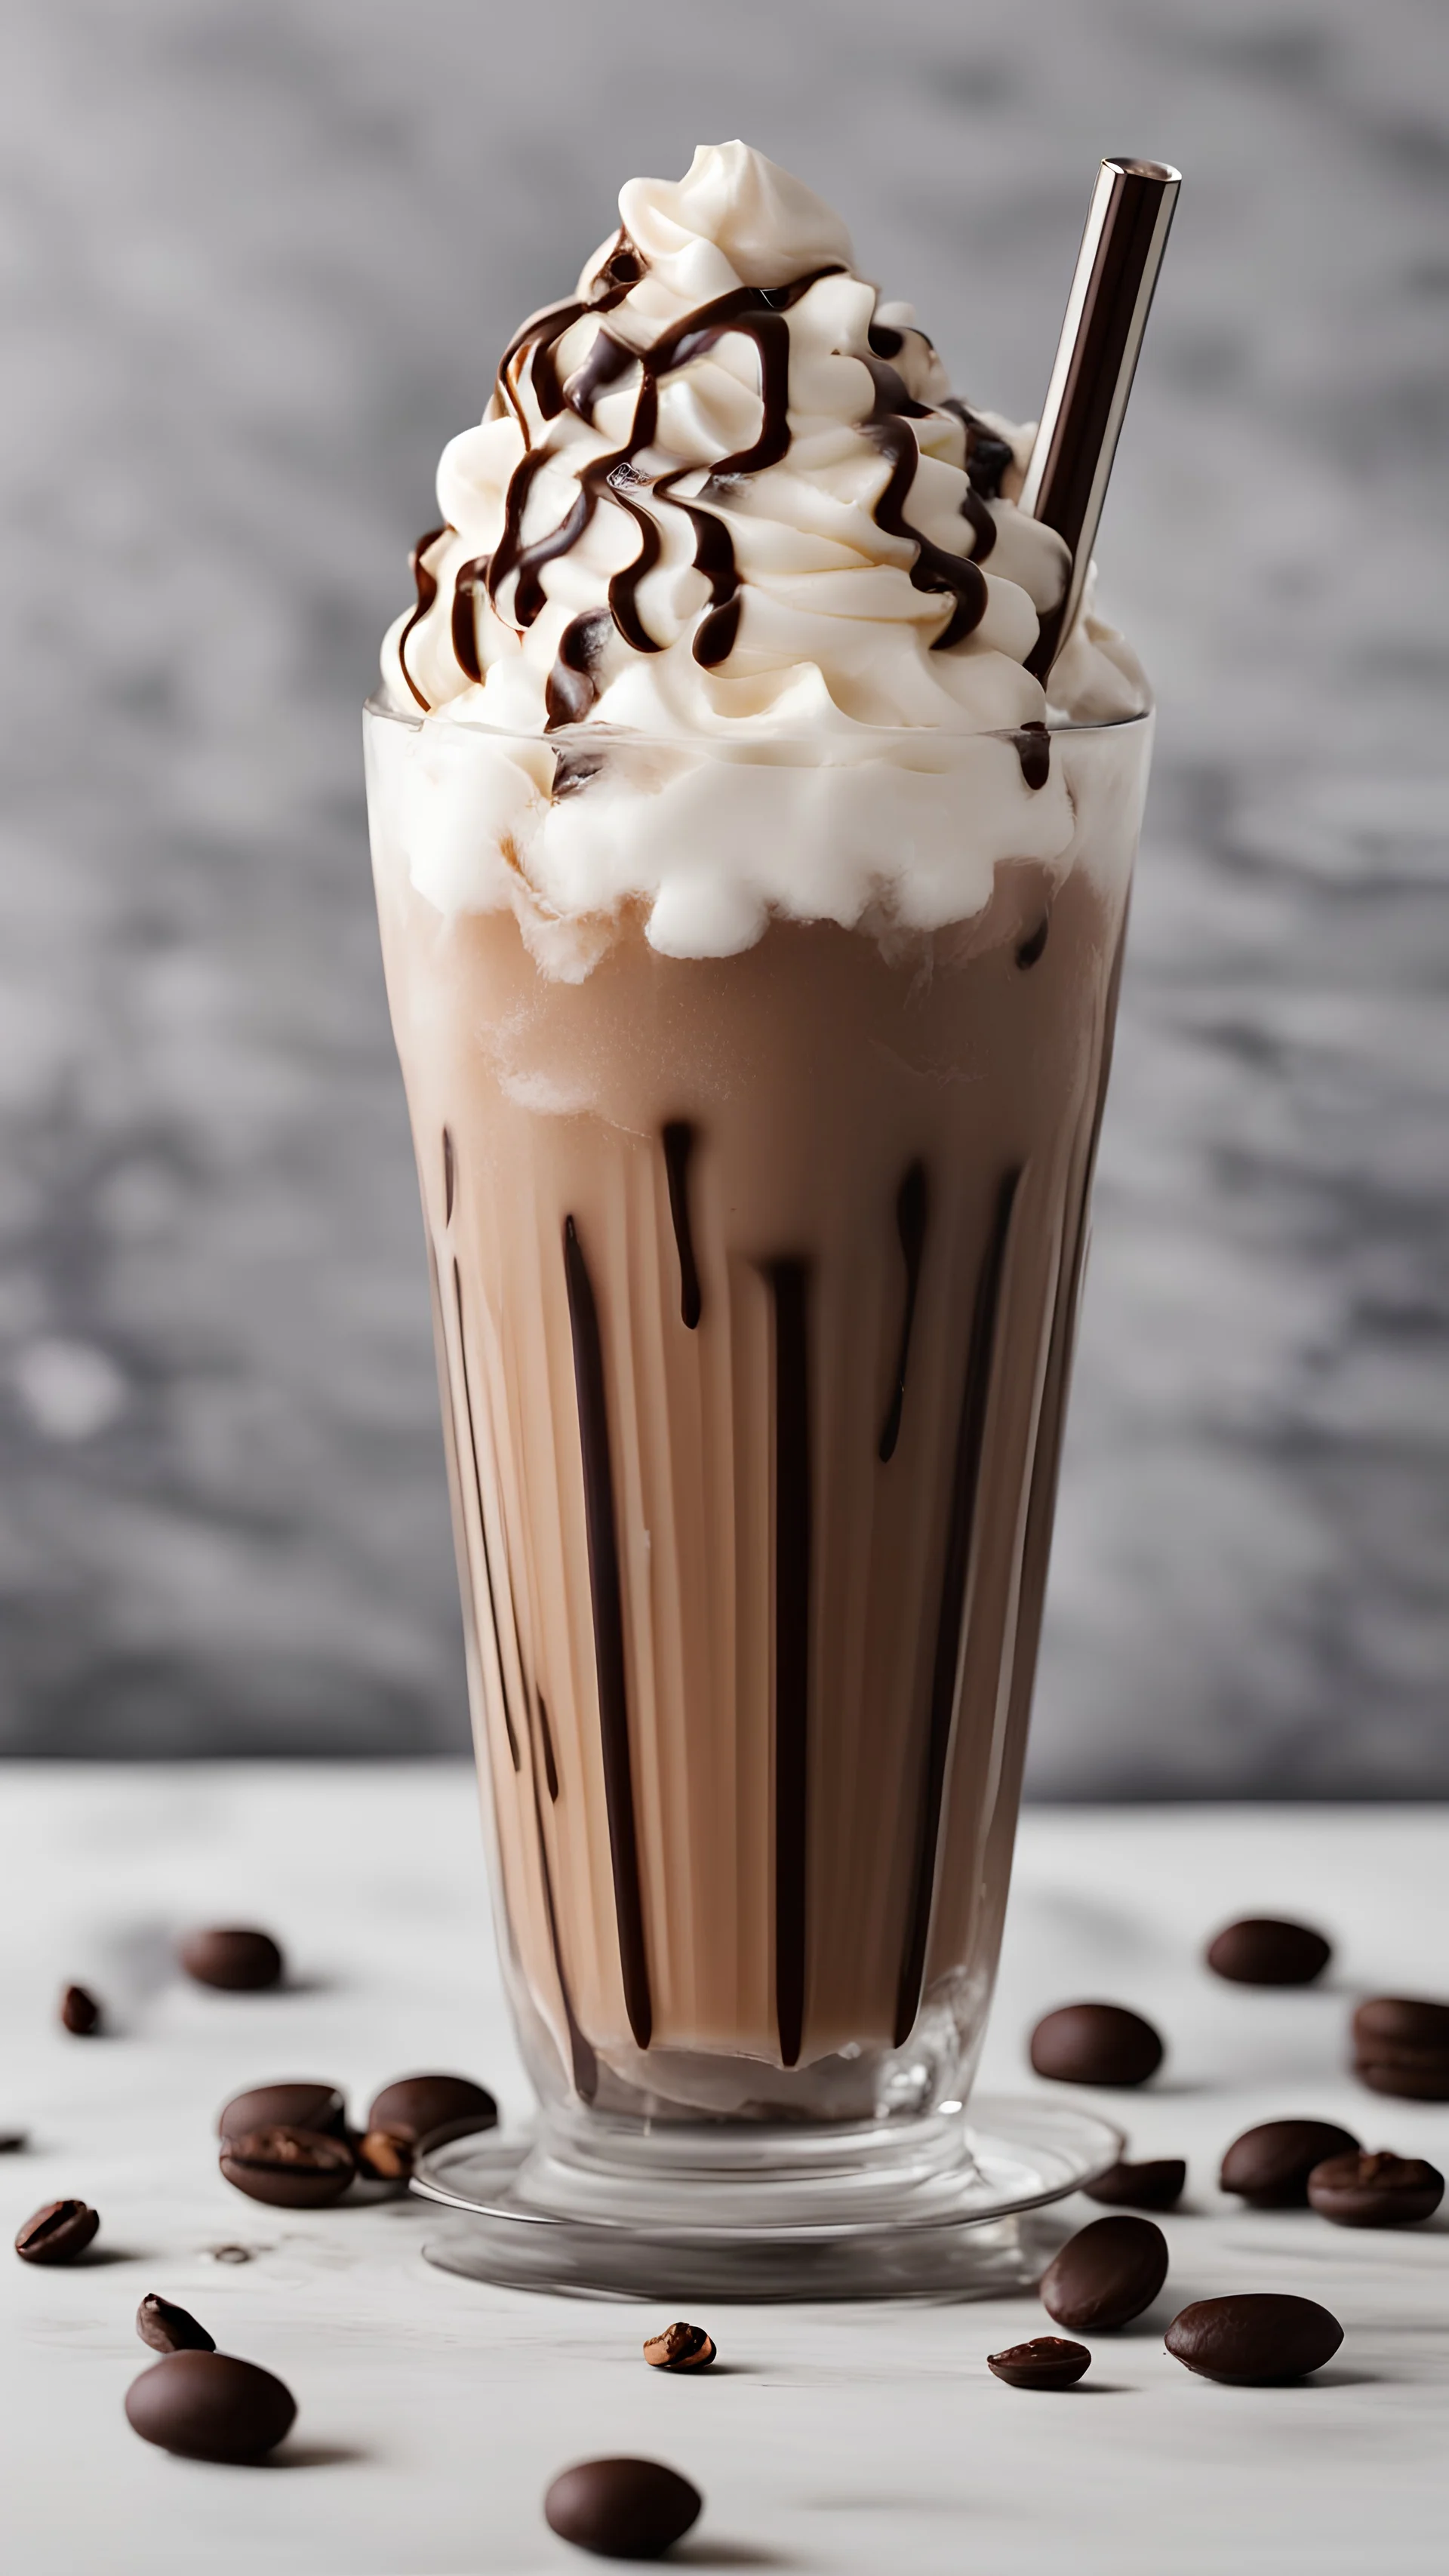 A tall glass filled with ice and topped with whipped cream and chocolate drizzle, with a straw and coffee beans scattered around.